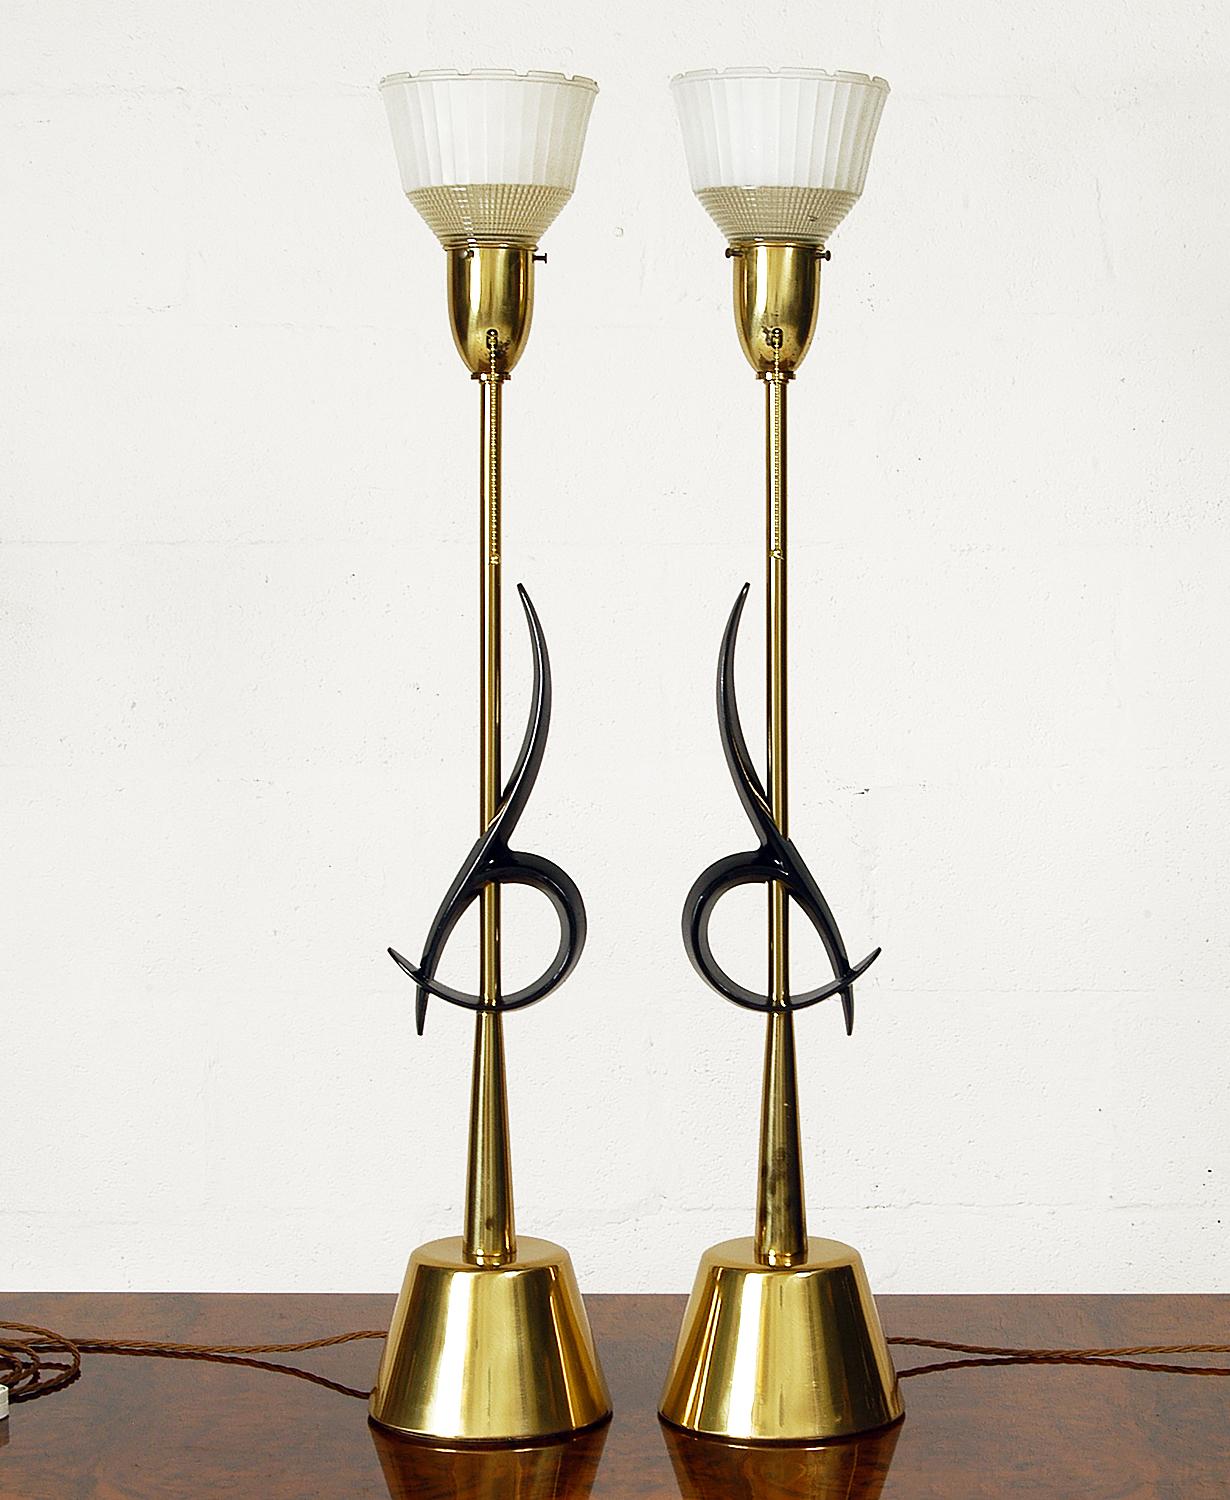 A spectacular pair of large table lamps designed and manufactured by the Rembrandt Lamp Company of Chicago. Standing a huge 95cm tall, these impressive lamps are classic American Mid-Century Modern.
The base and stem are made from brass, with an